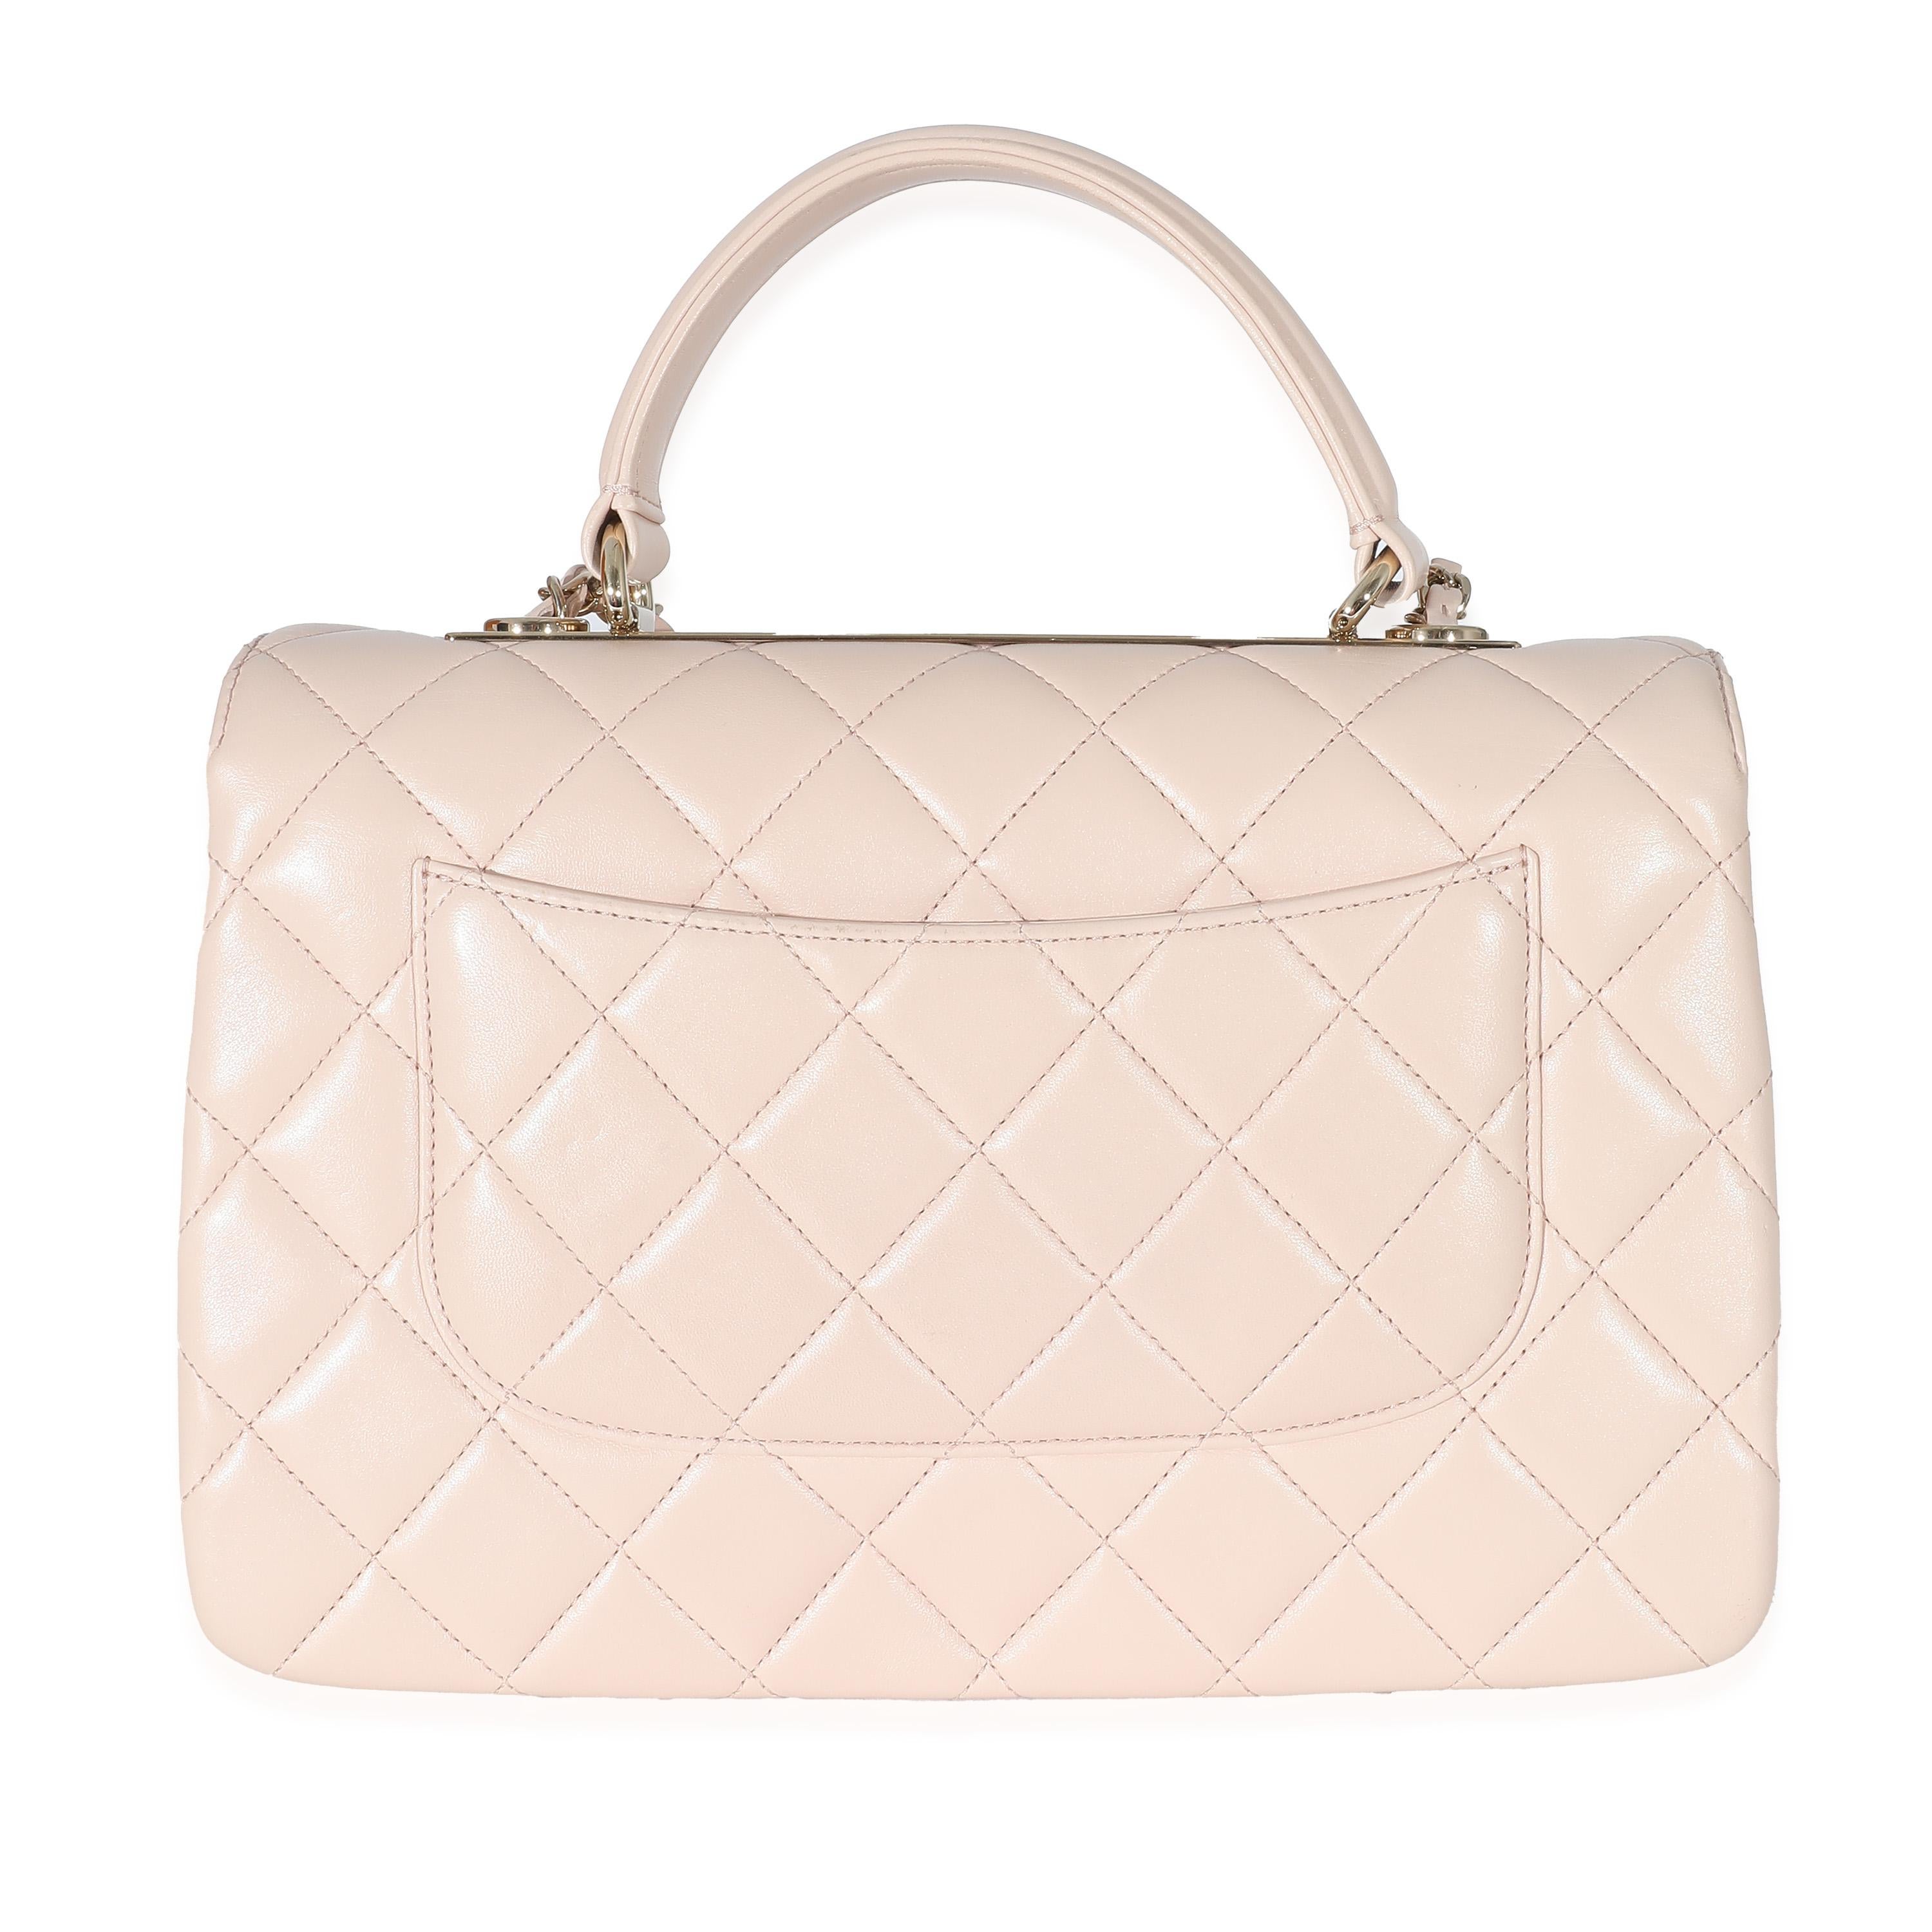 Chanel Pink Quilted Lambskin Medium Trendy CC Dual Top Handle Bag For Sale 1